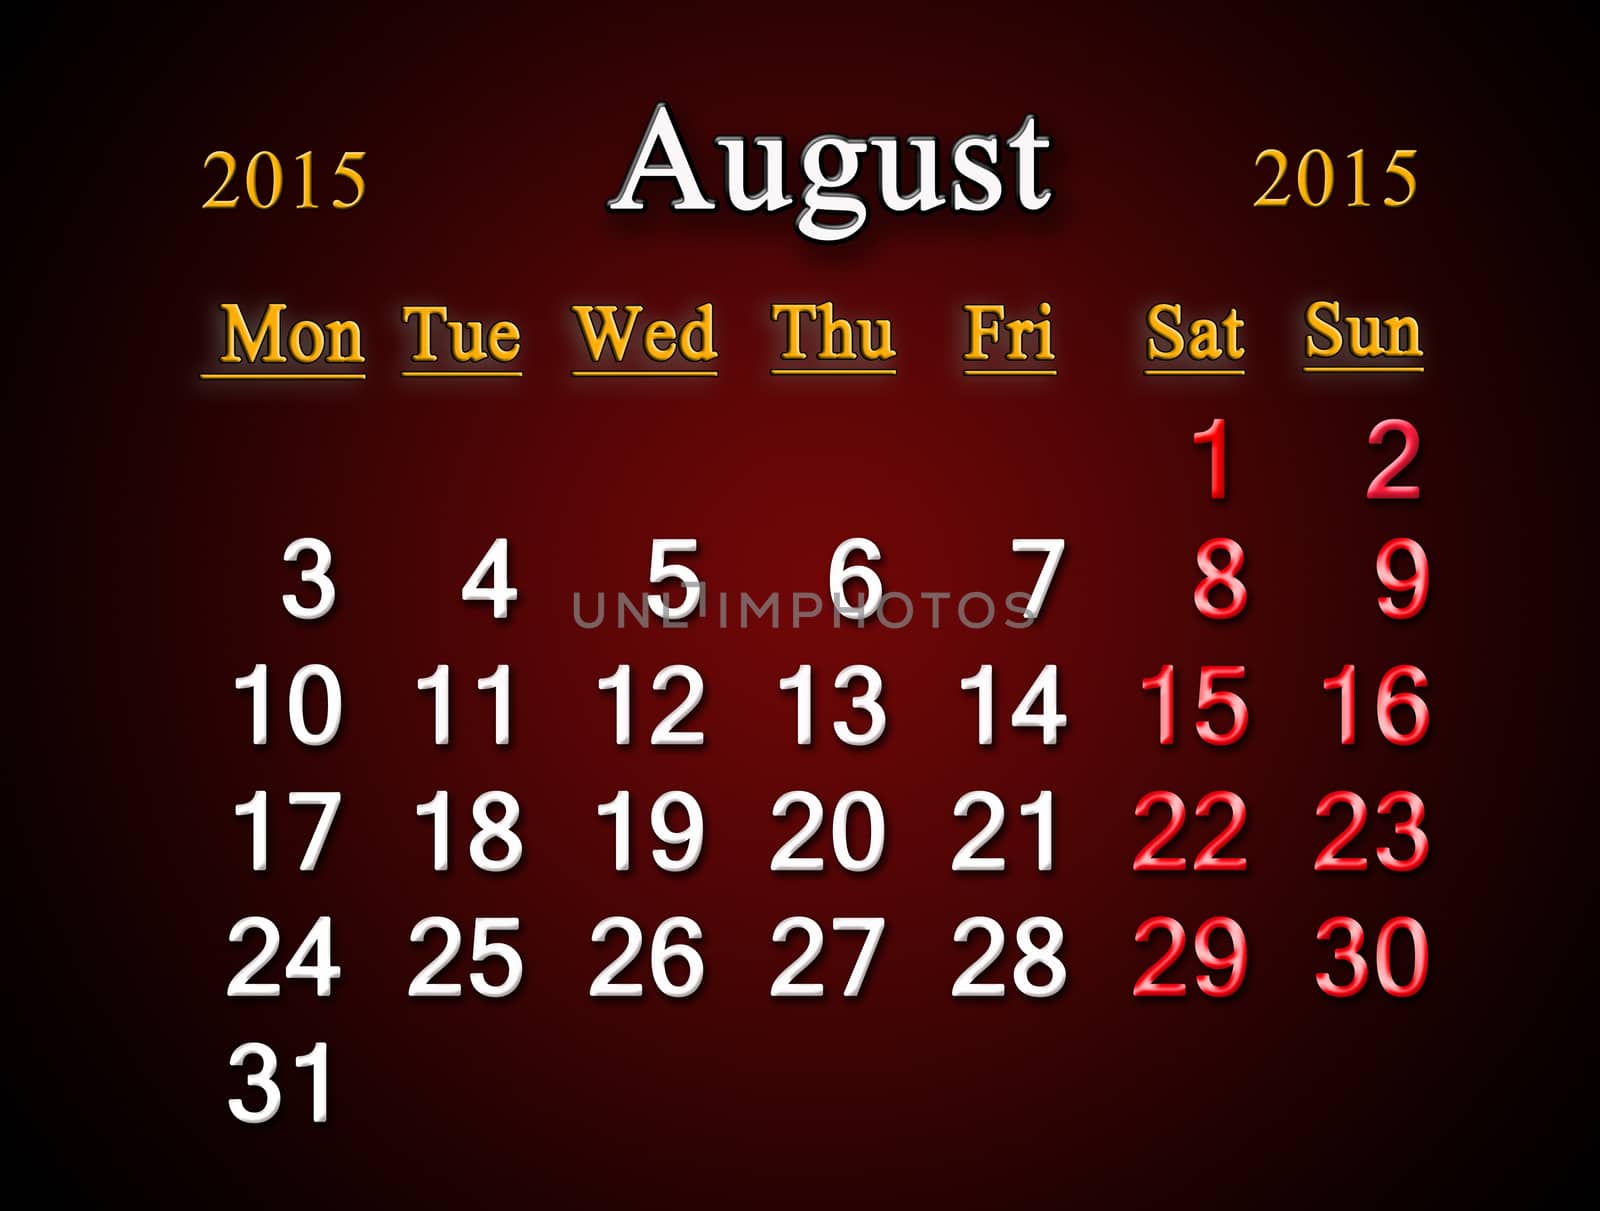 beautiful claret calendar on August of 2015 year